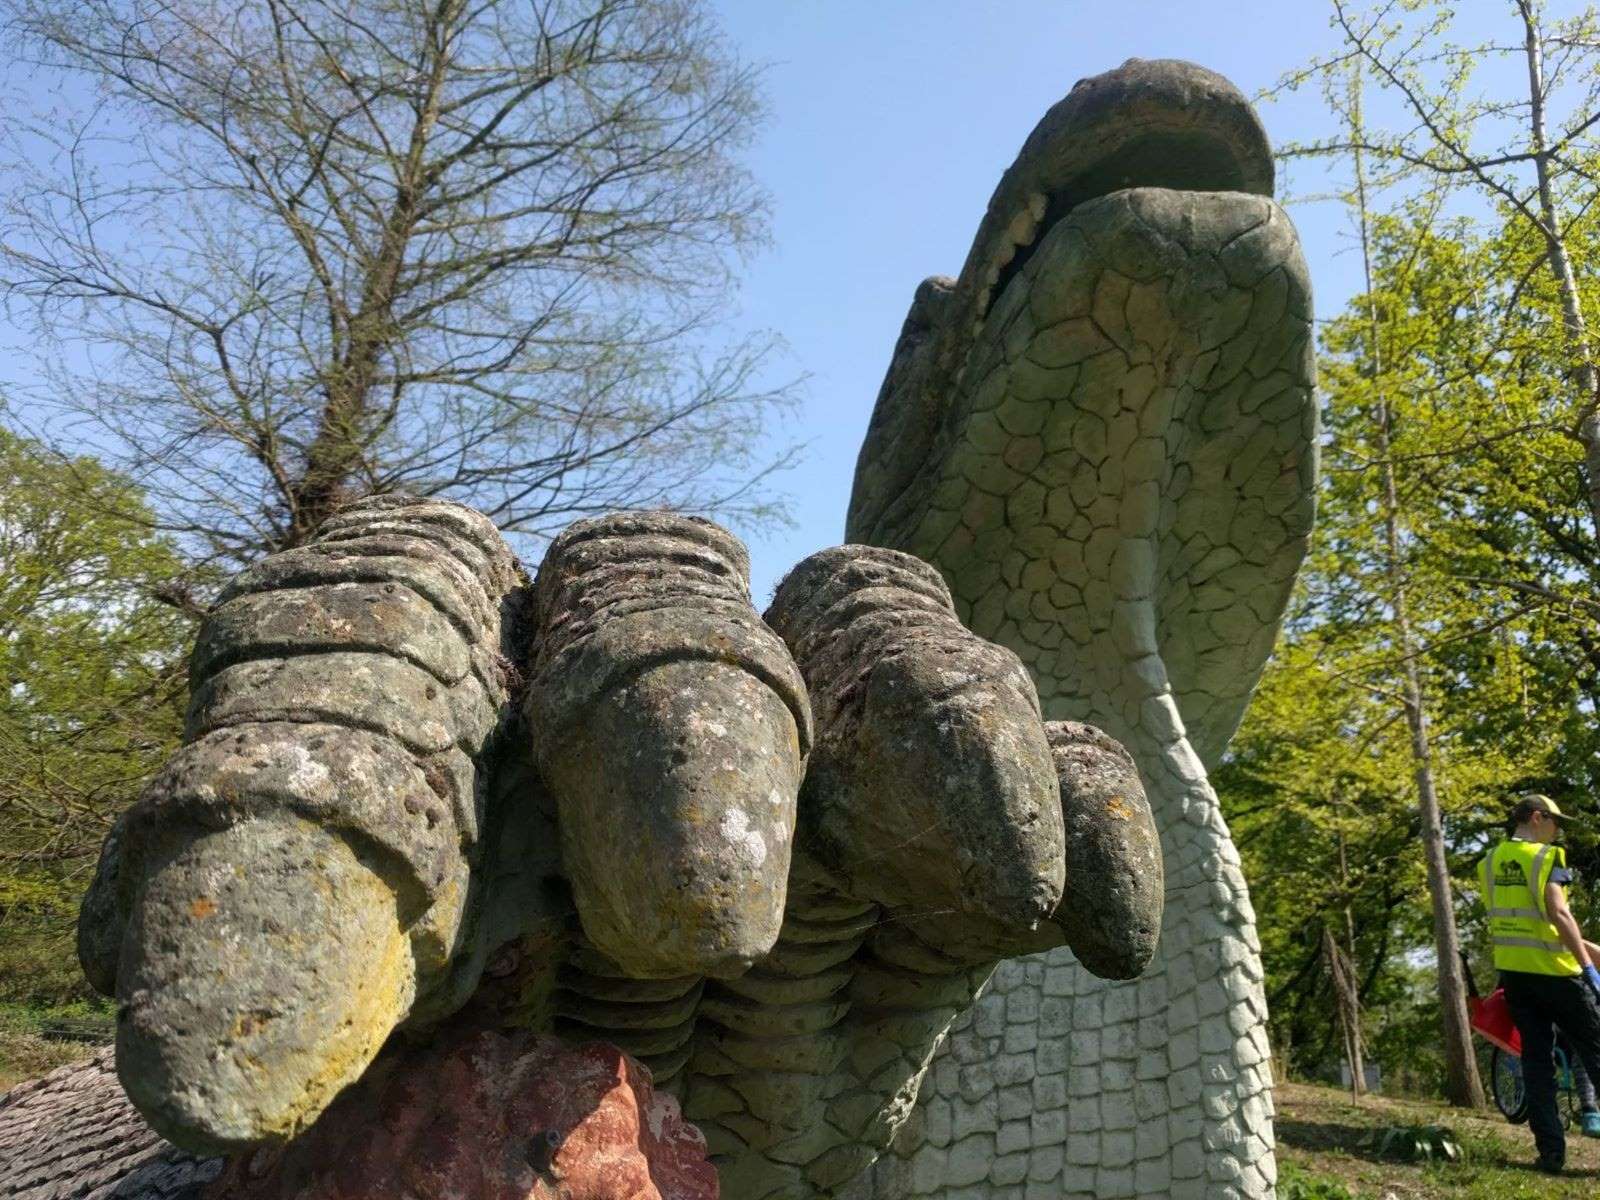 Iguanodon Information About The Crystal Palace Statues